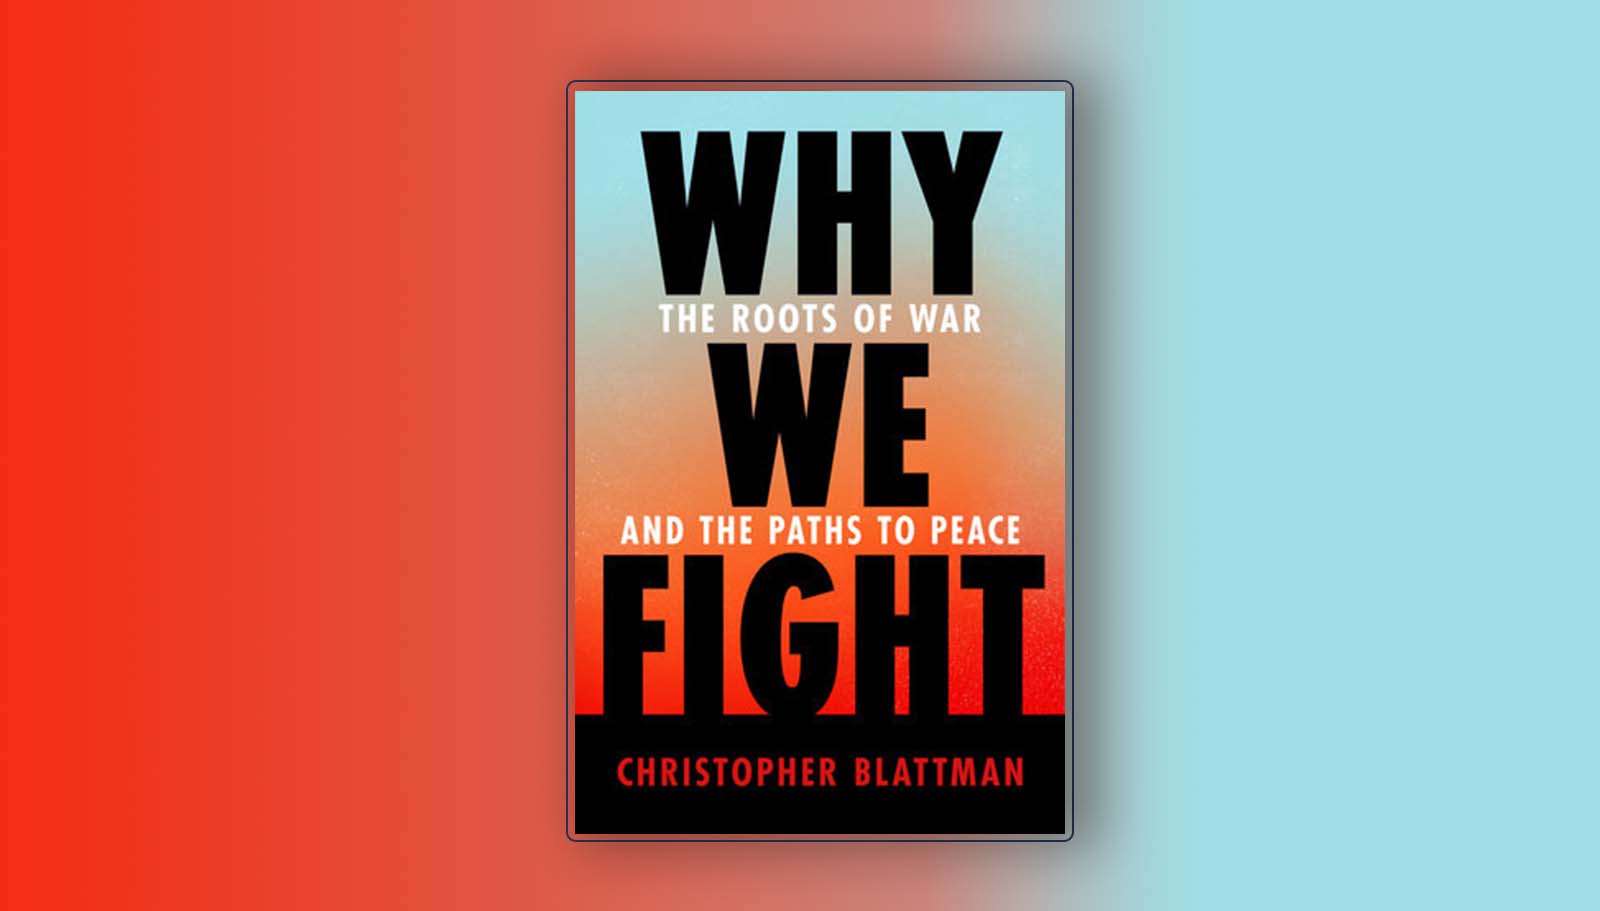 Photo: Cover of Why We Fight: The roots of war and the paths to peace by Christopher Blattman. Credit: Penguin Random House.